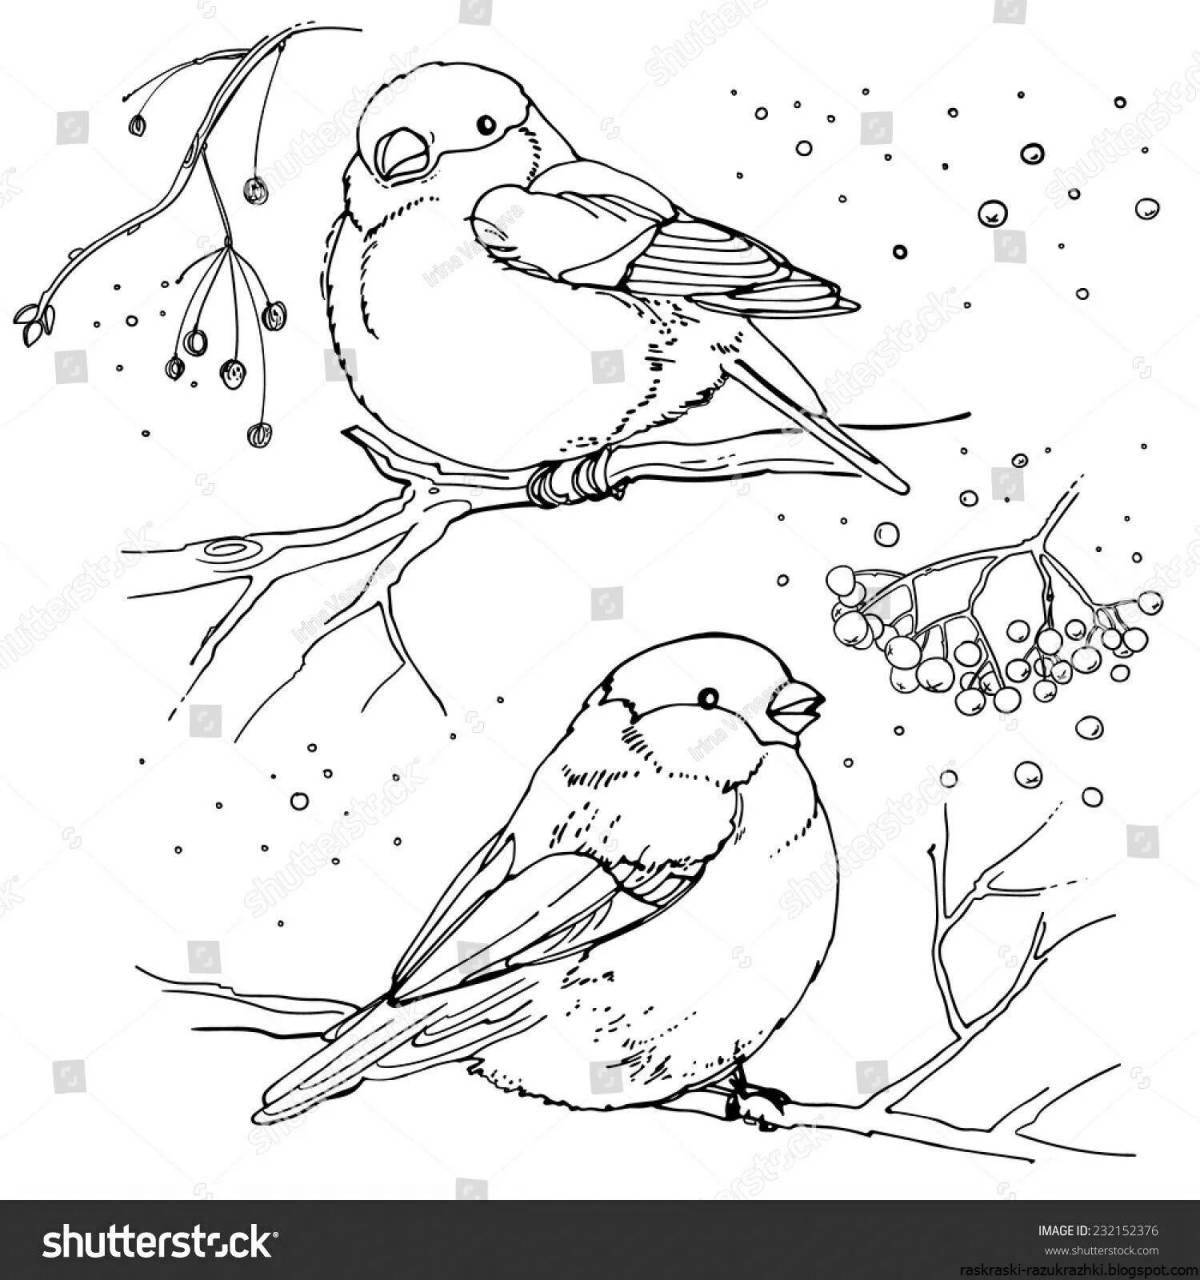 Coloring book exquisite bullfinch and titmouse